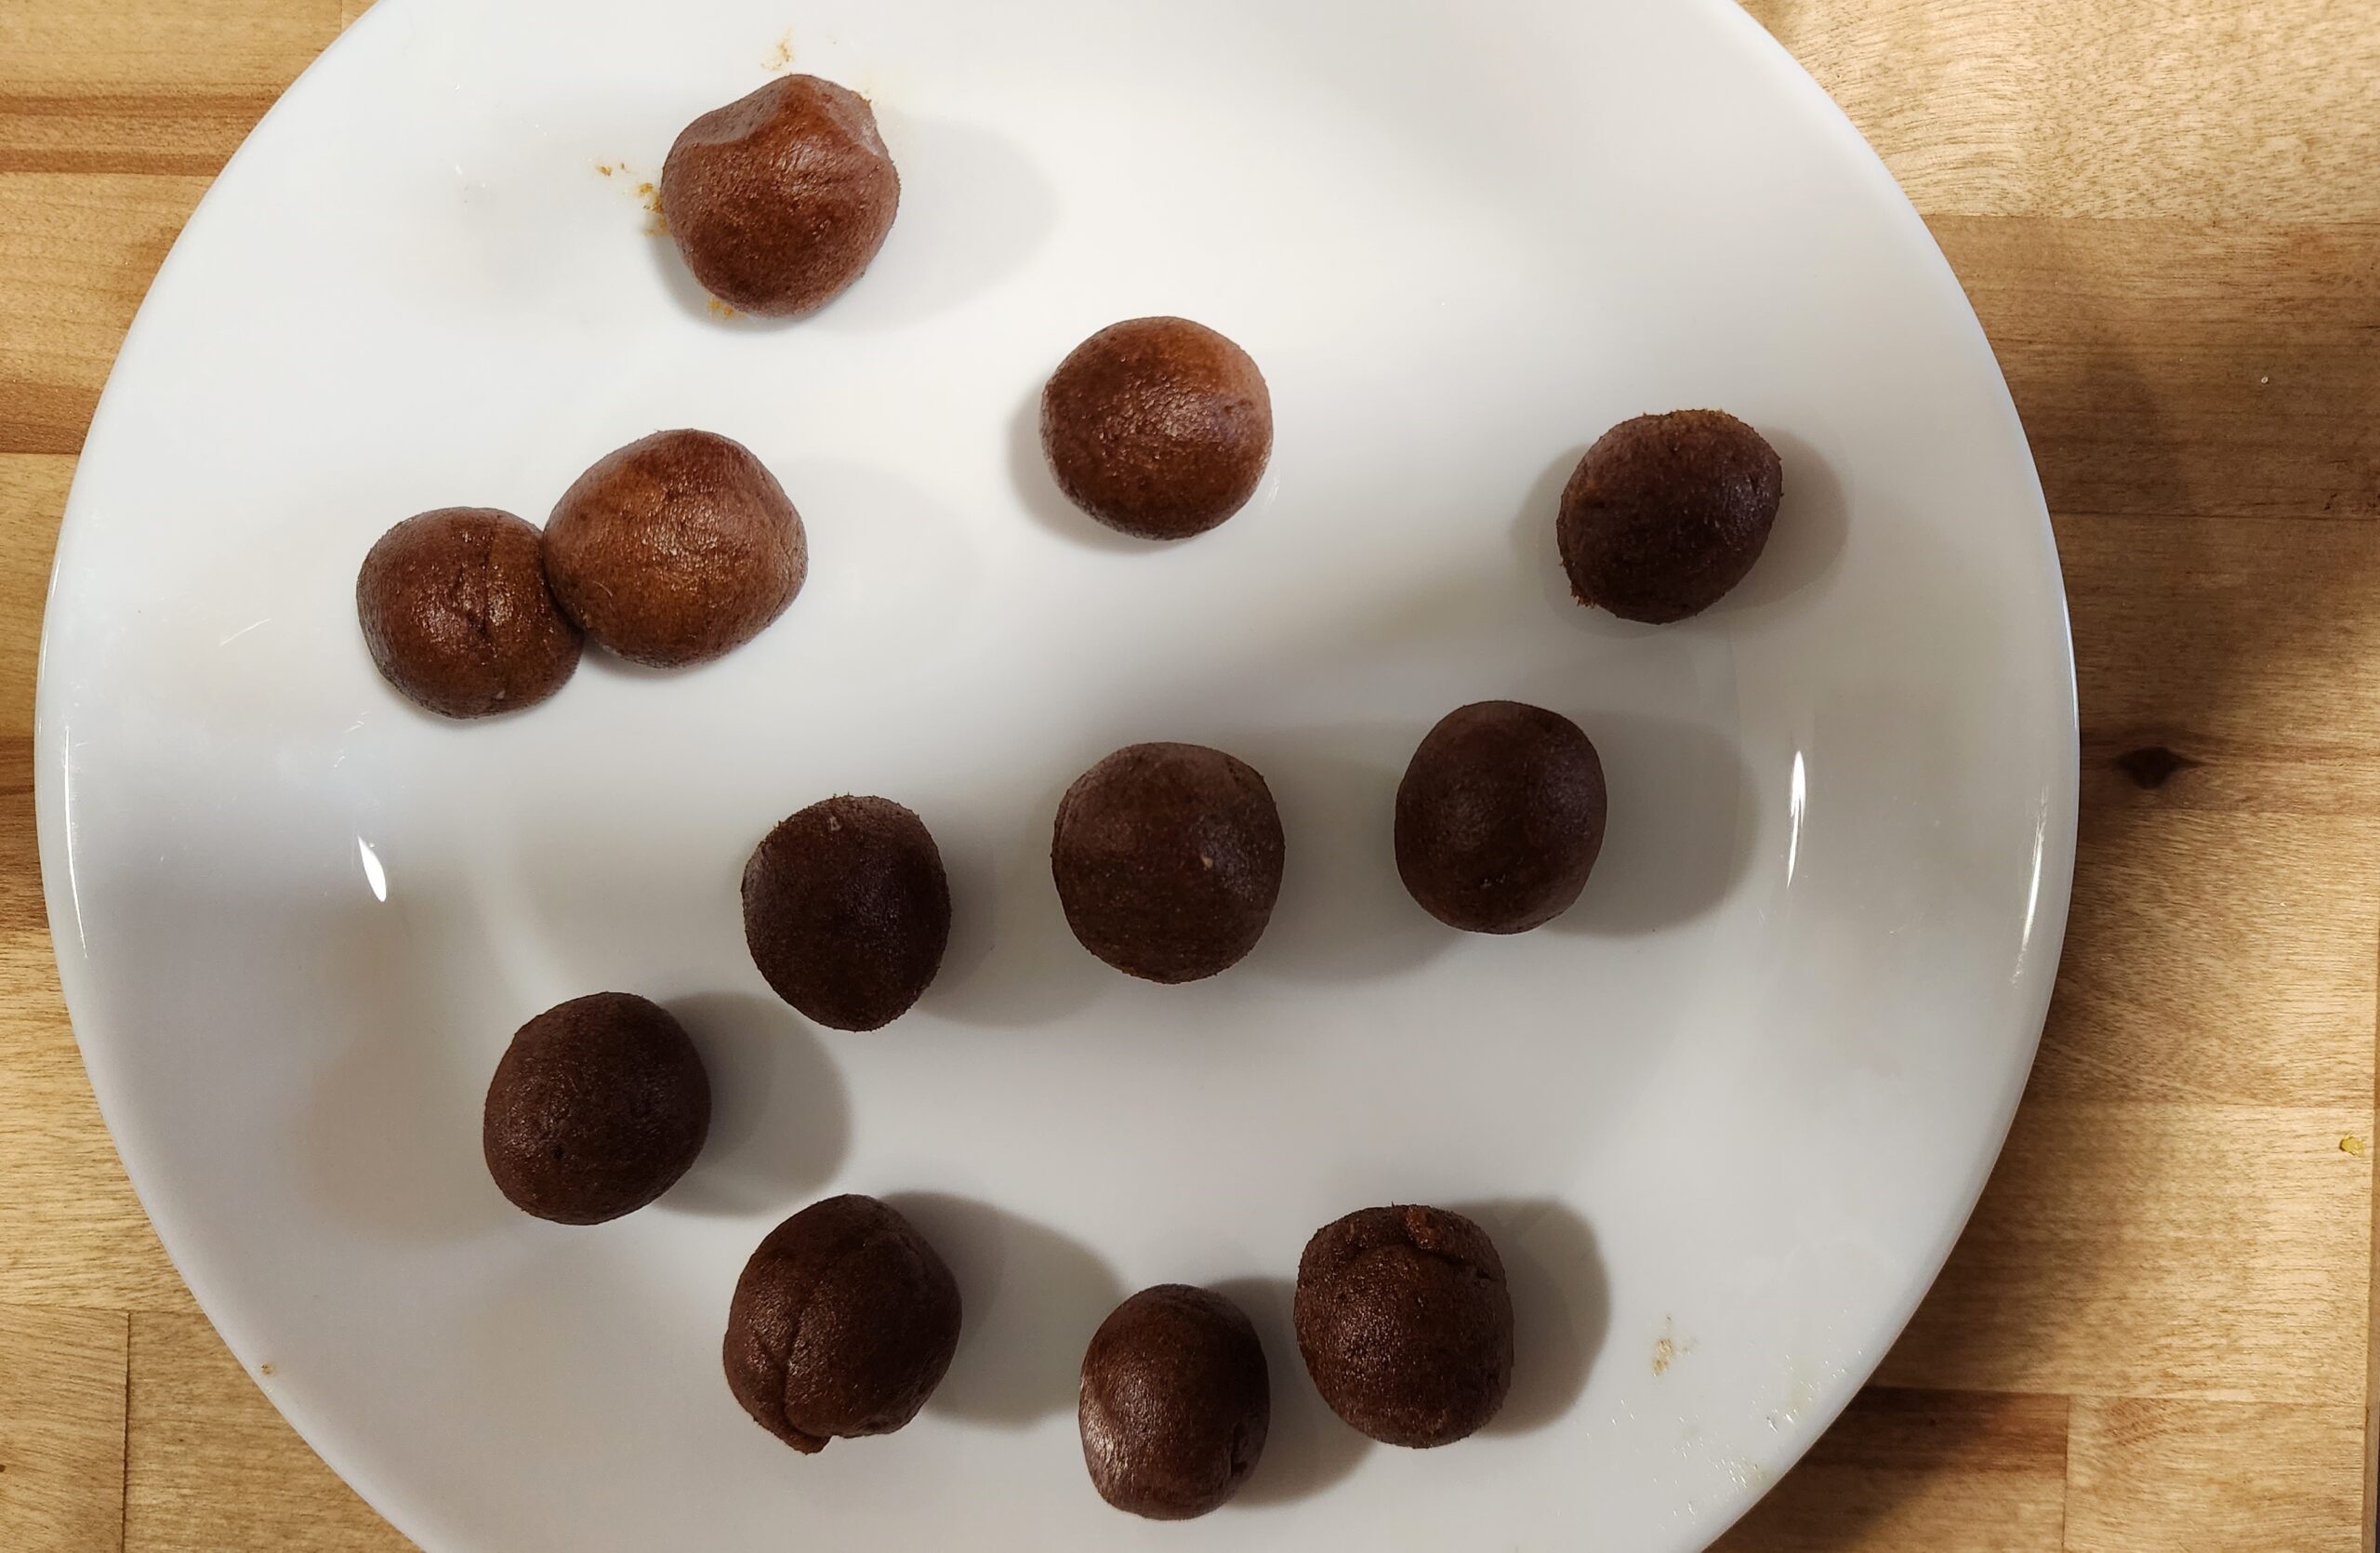 Small balls made from dates paste